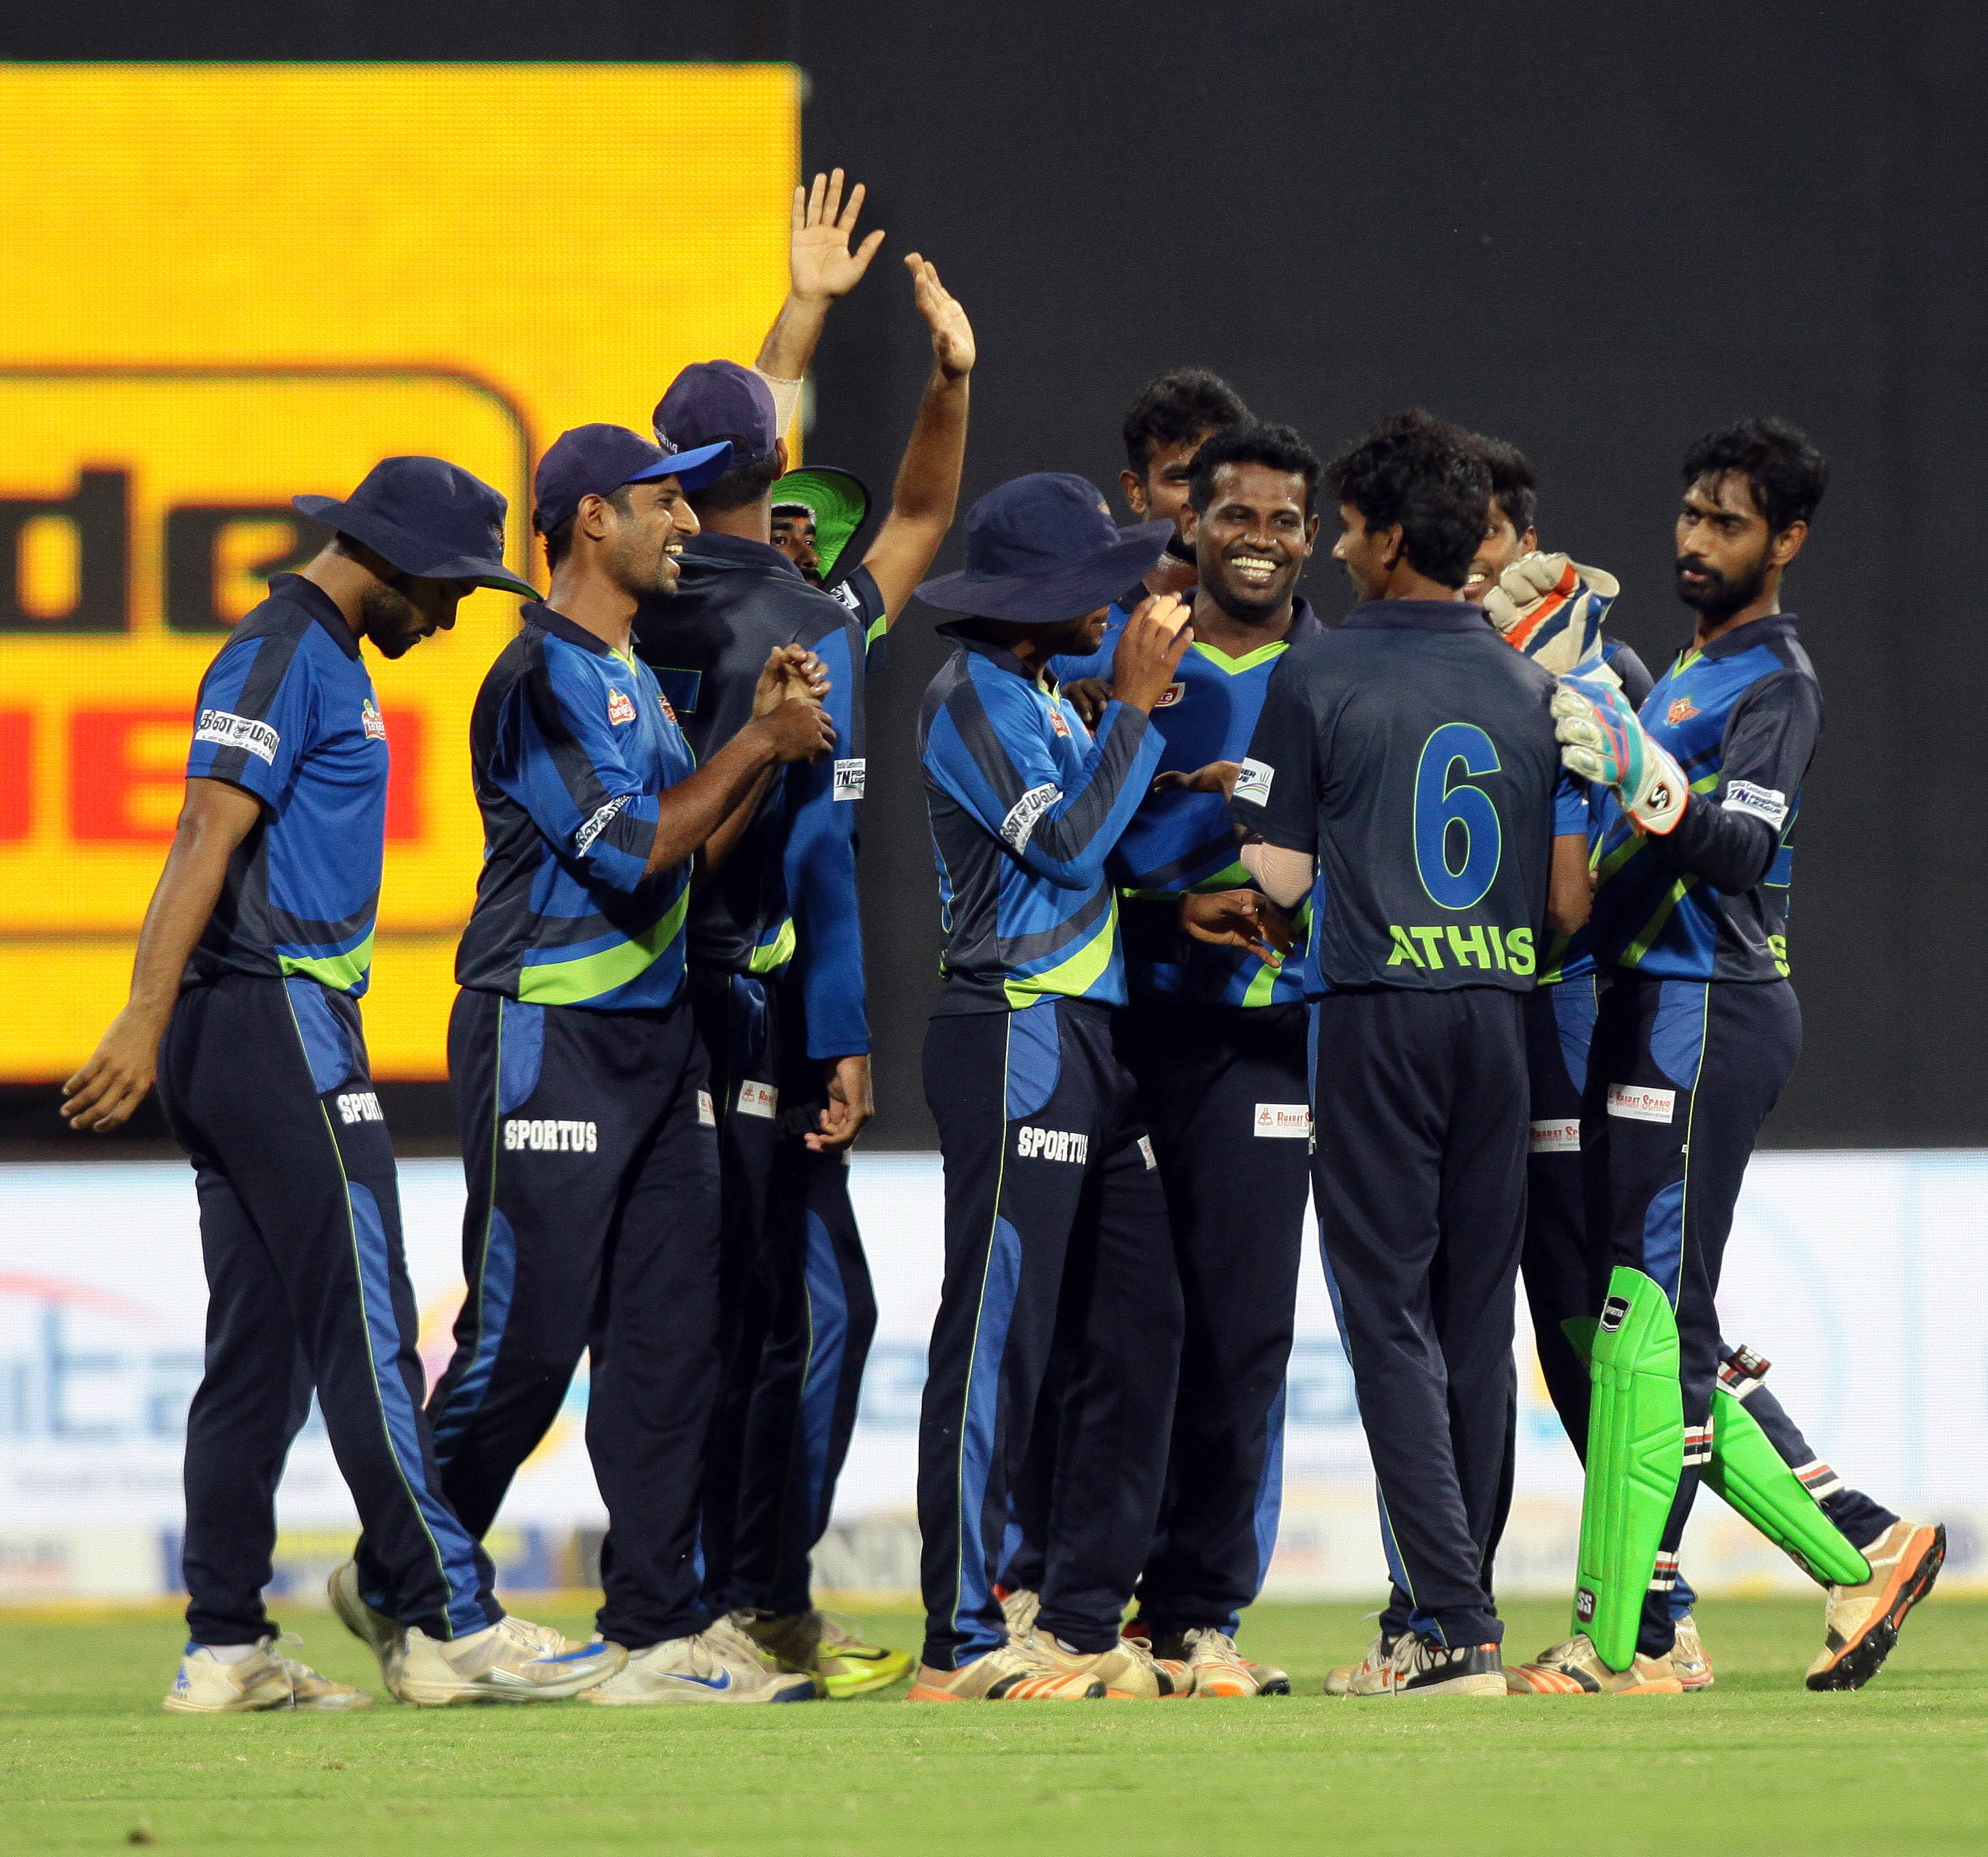 TNPL Patriots thump Warriors and live to fight another day!